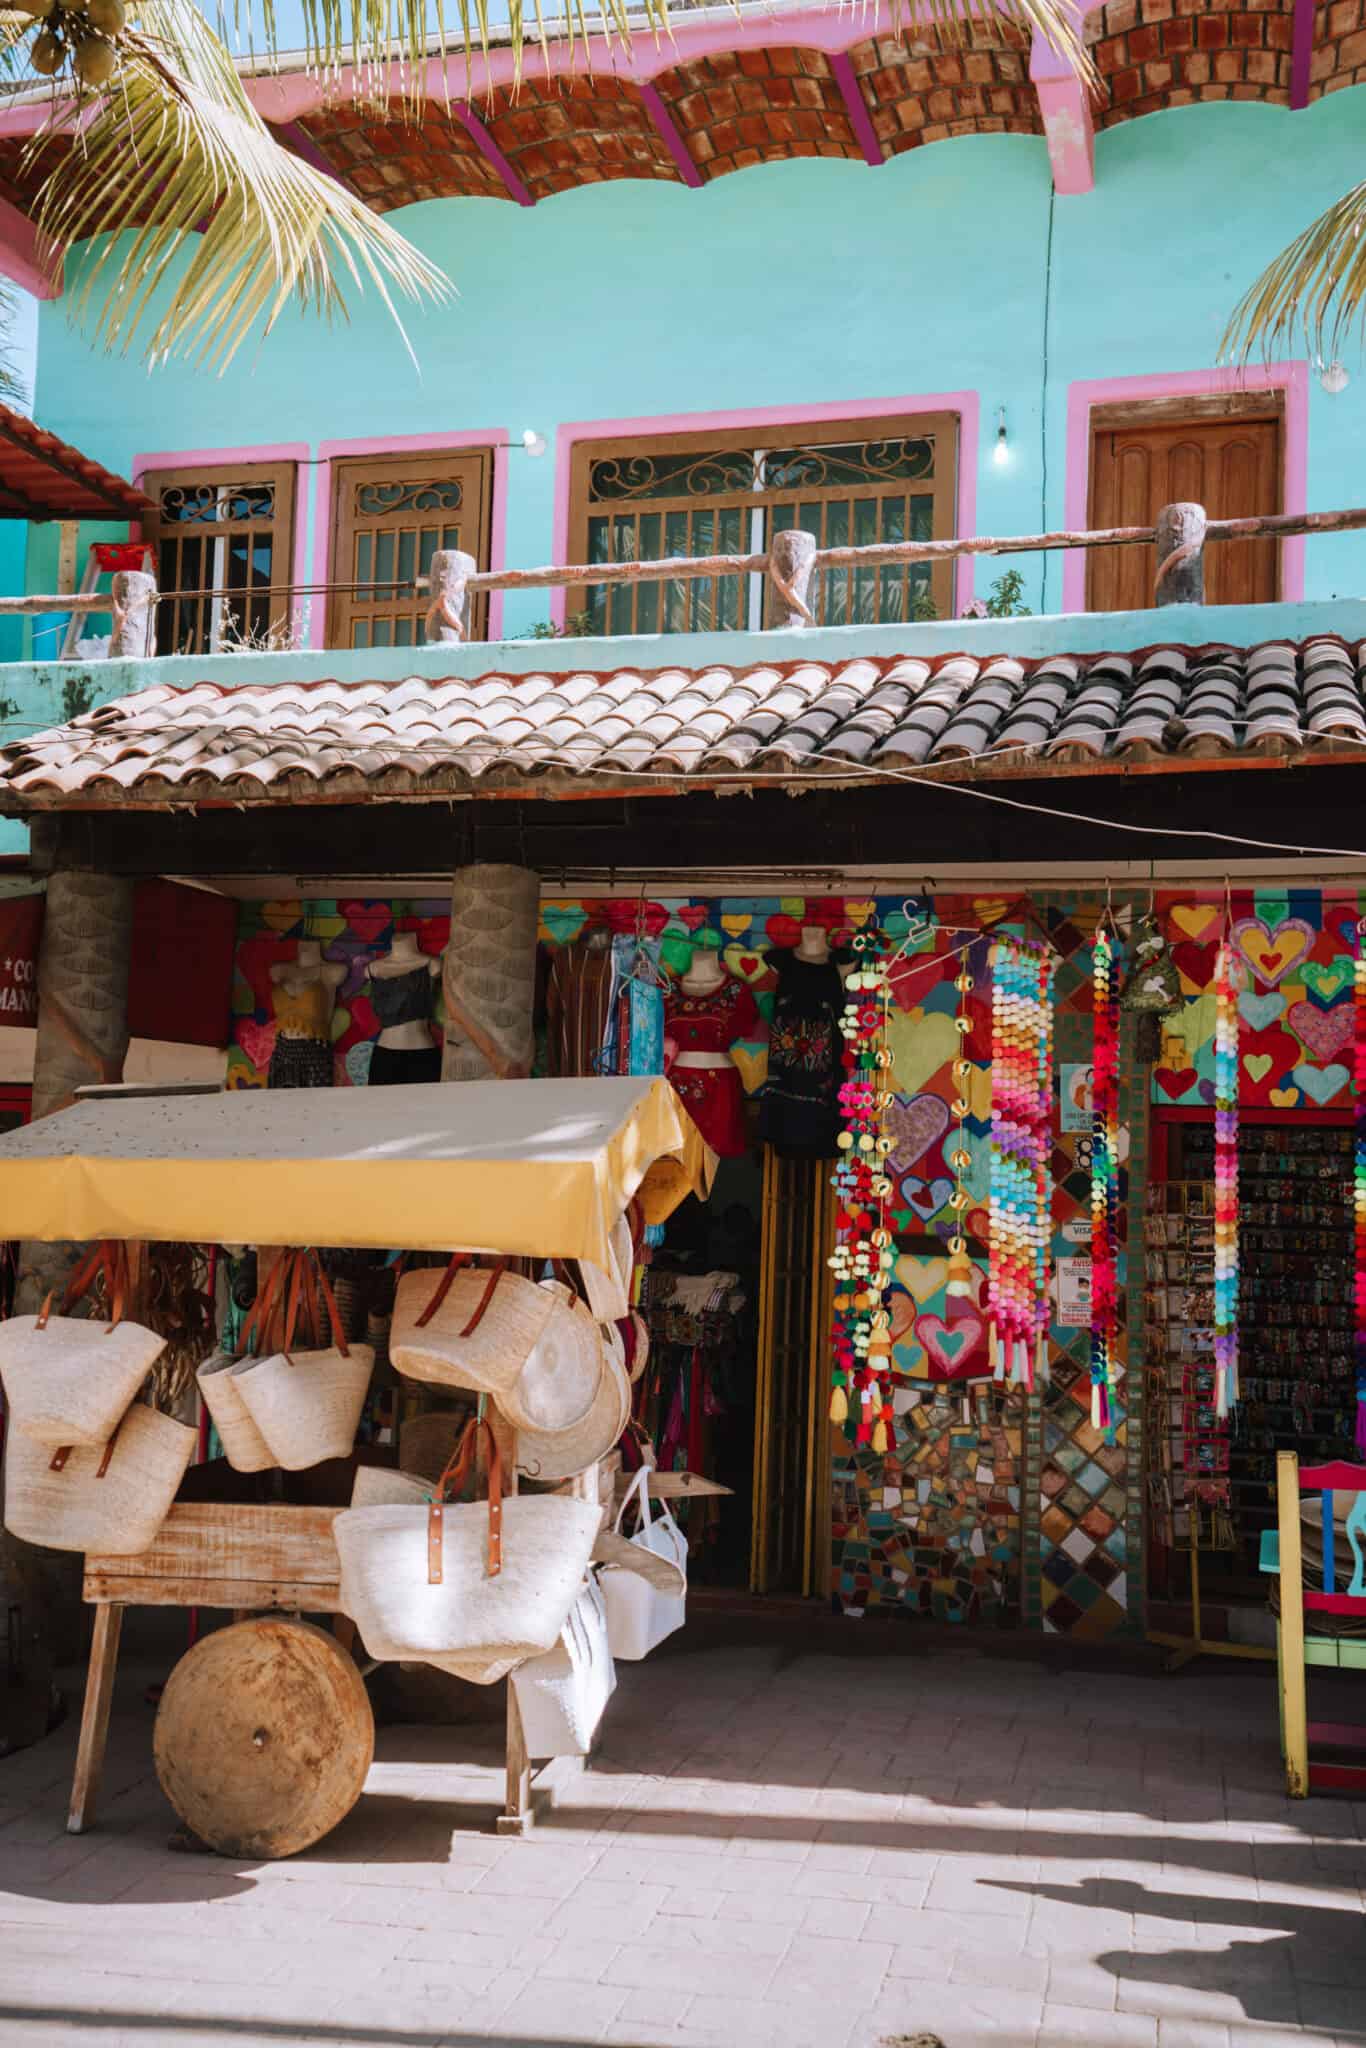 A colorful street market in Sayulita, Mexico City.